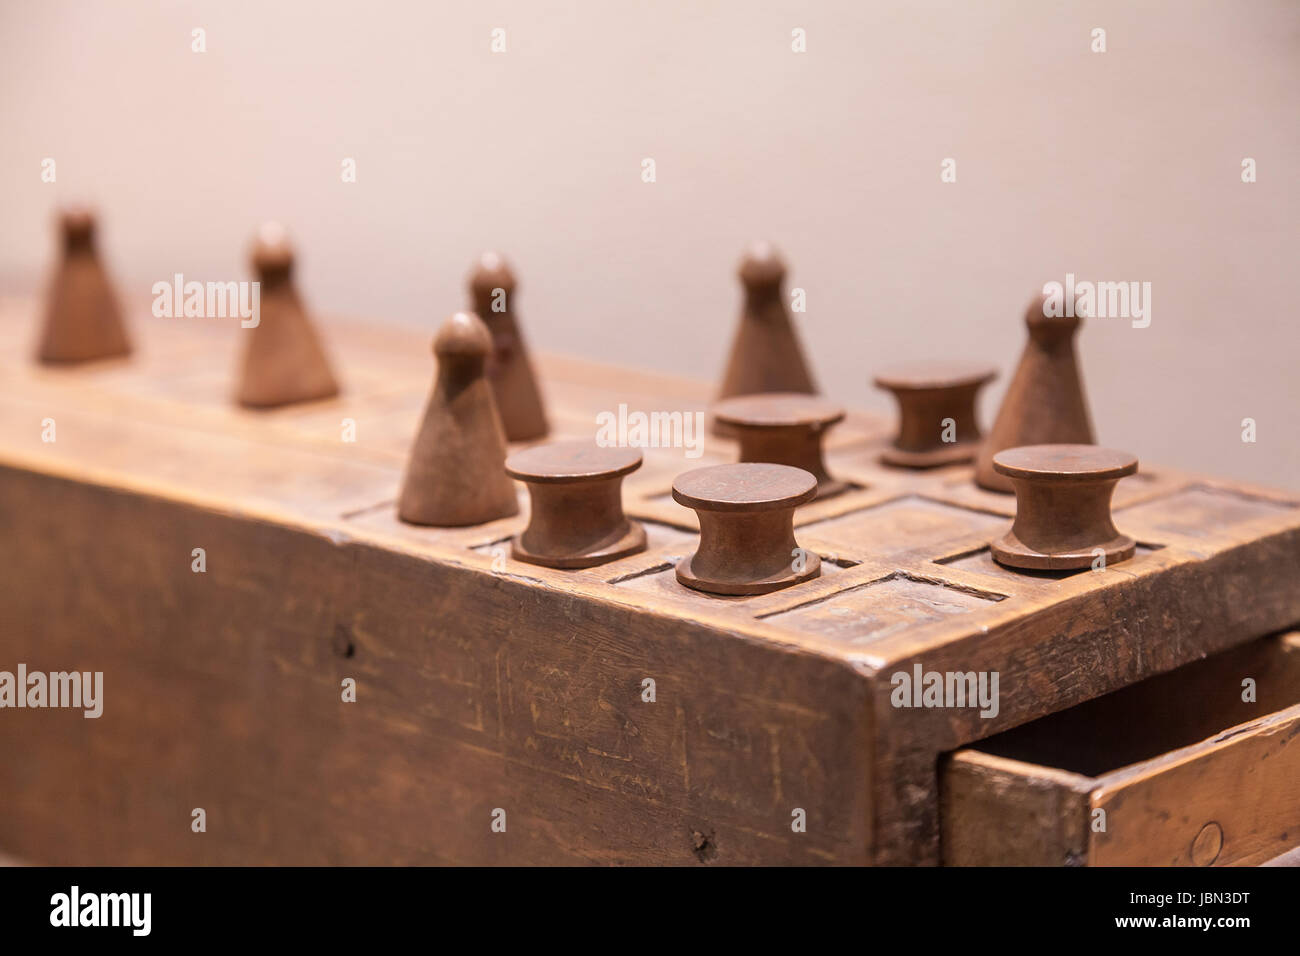 Ancient Board Games: Senet, The Royal Game Of Ur, Chess & More